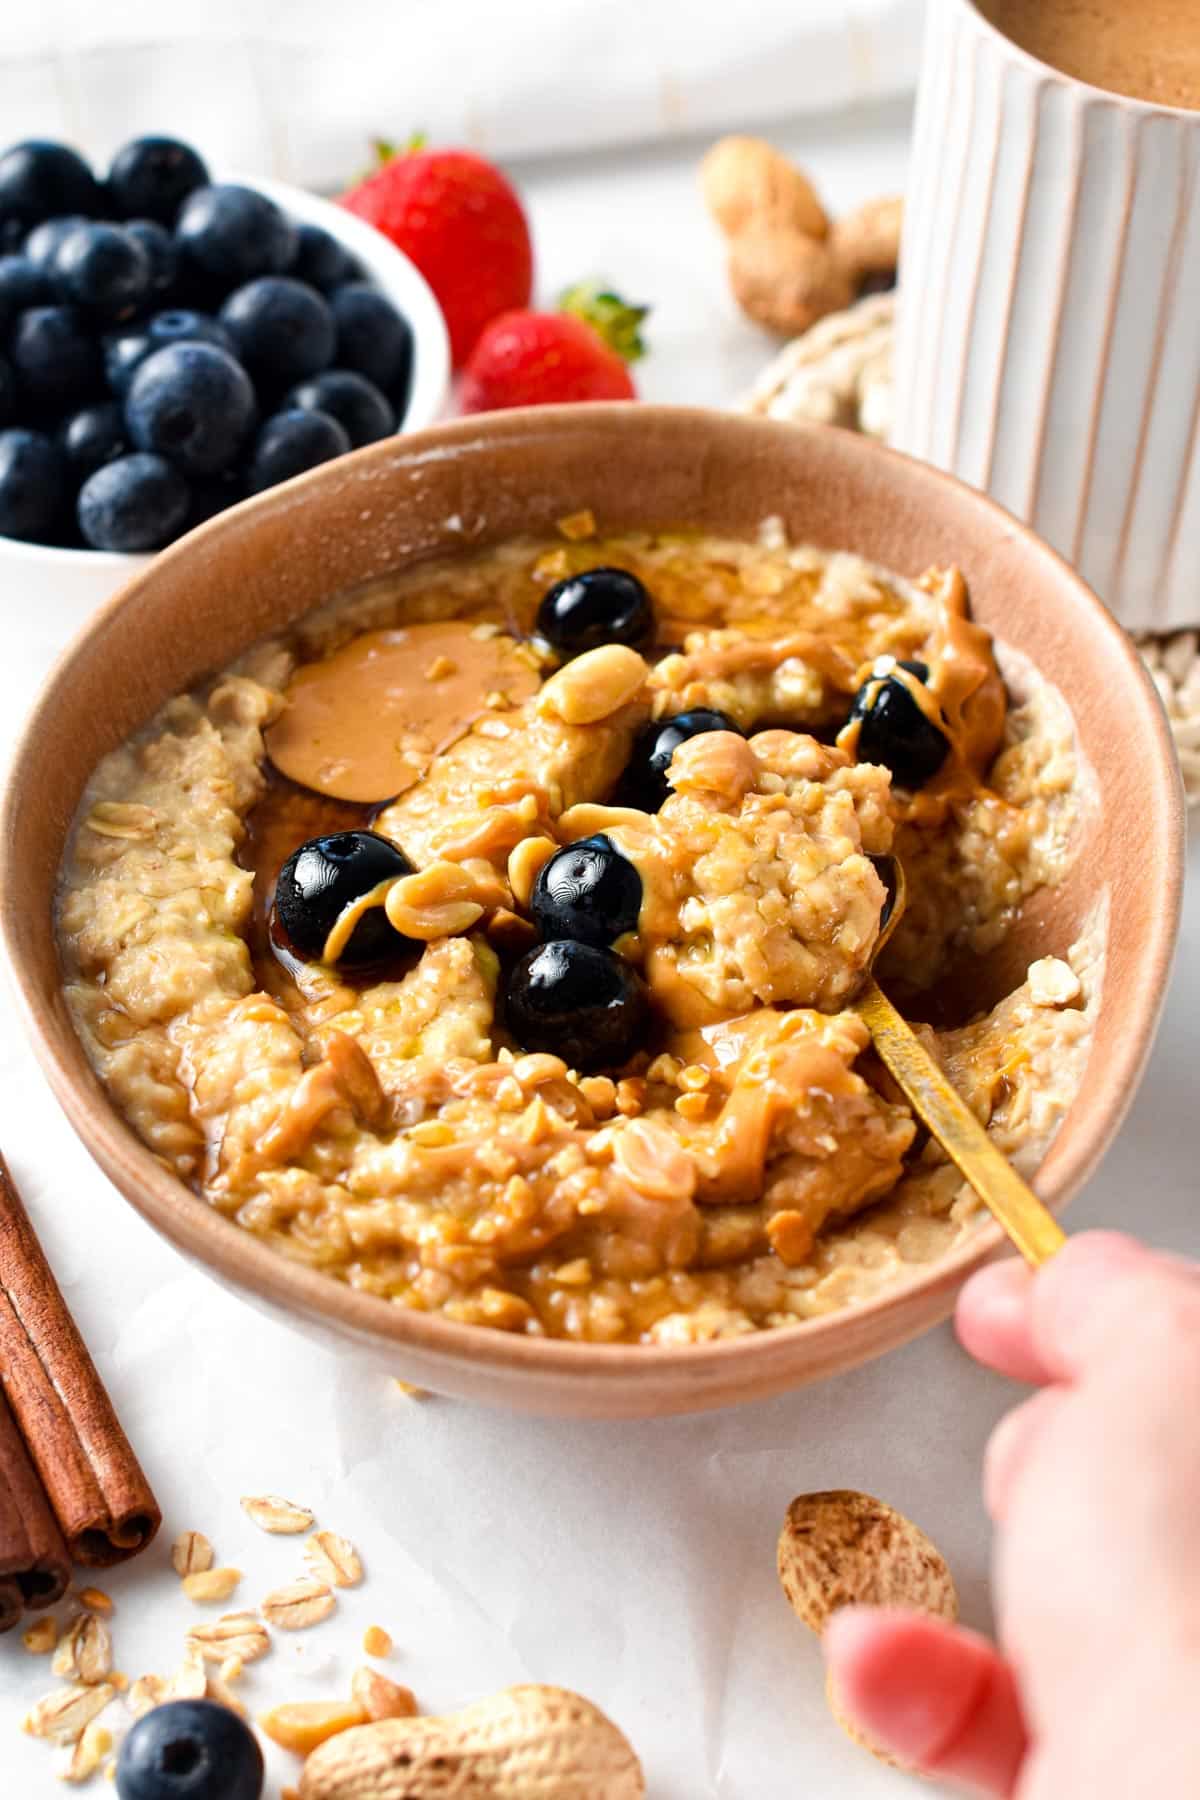 This Peanut Butter Oatmeal bowl is the most creamy, warm healthy breakfast ever packed with proteins, and fiber to keep you full all morning. Plus, this homemade oatmeal recipe is also easy to whip in less than 10 minutes for busy mornings.